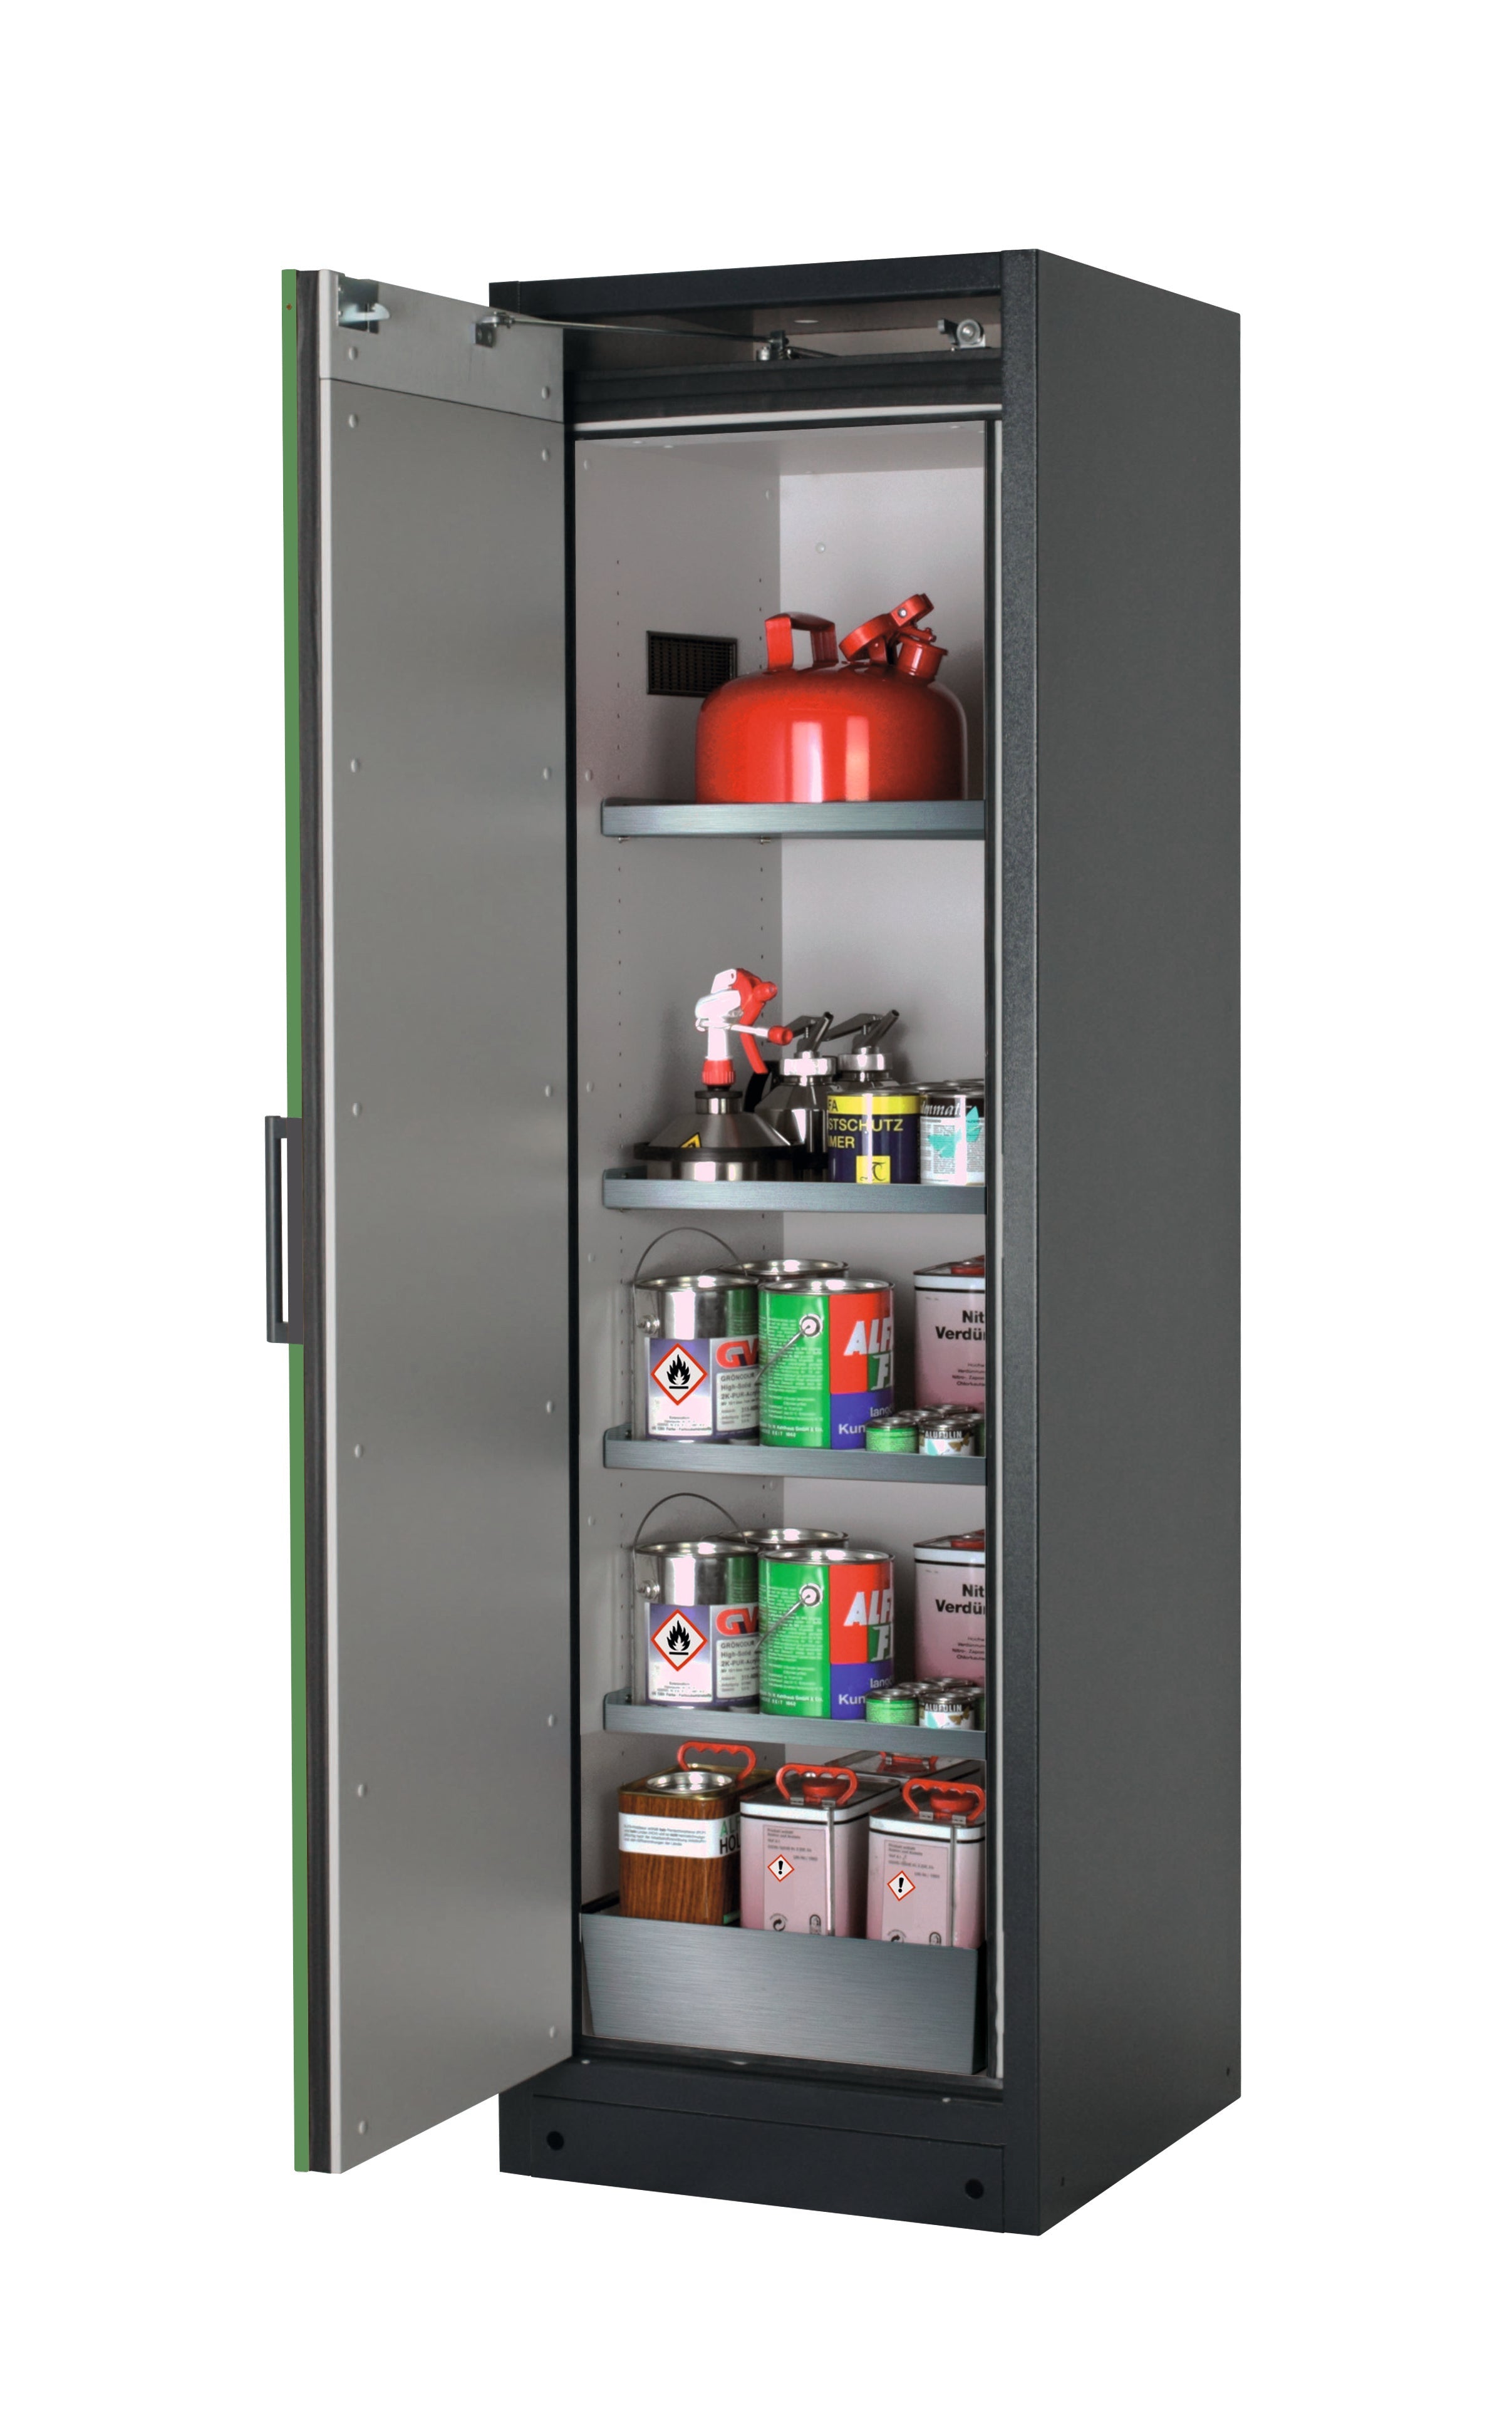 Type 90 safety storage cabinet Q-CLASSIC-90 model Q90.195.060 in reseda green RAL 6011 with 4x shelf standard (stainless steel 1.4301),